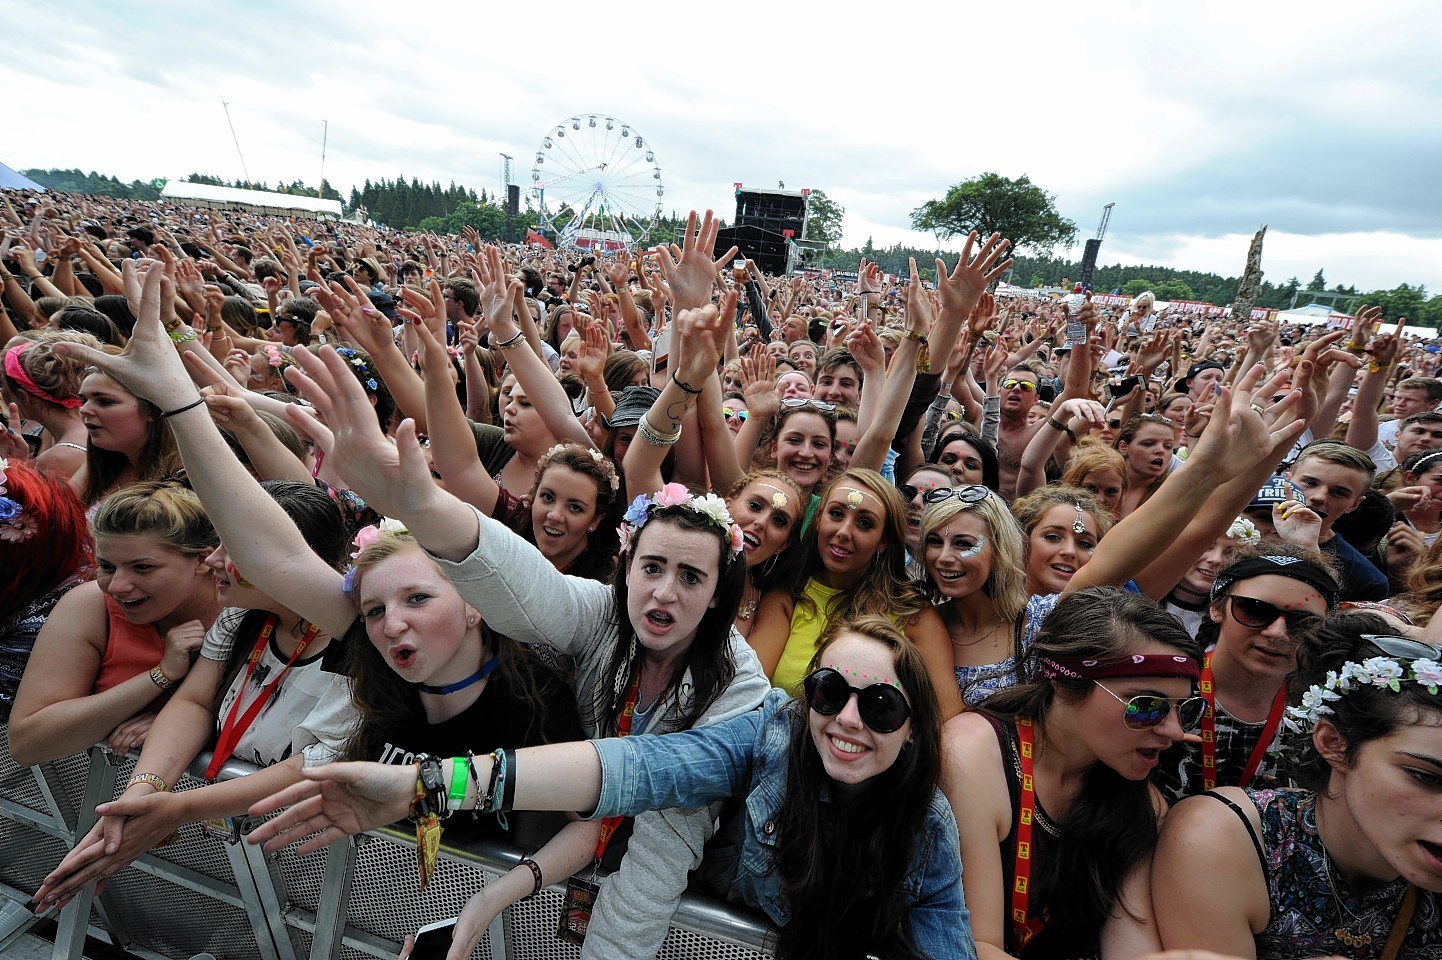 Crowds at T in the Park